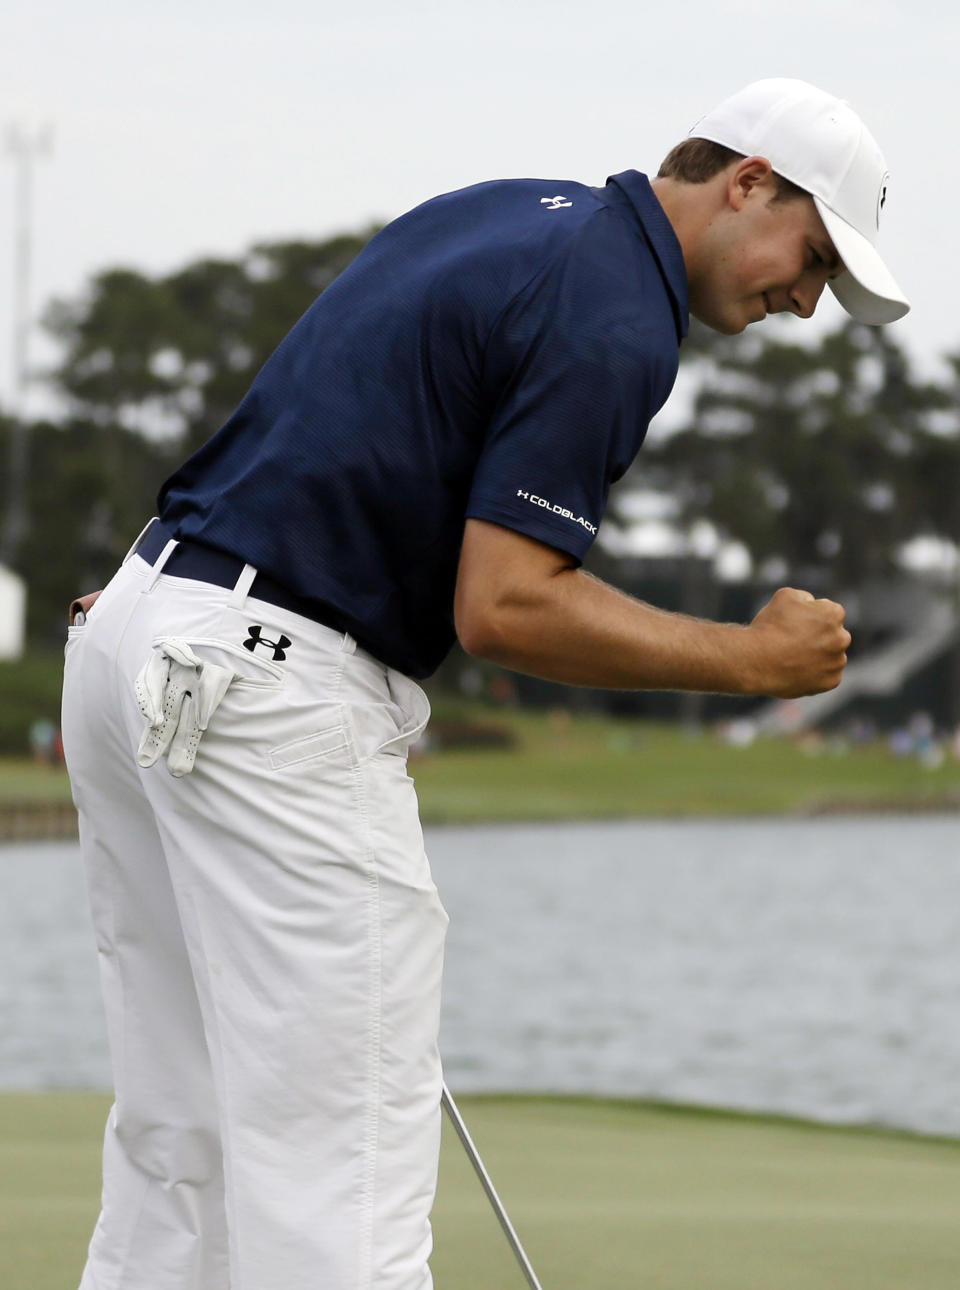 Jordan Spieth gestures after he made a birdie on the 18th hole during the third round of The Players championship golf tournament at TPC Sawgrass, Saturday, May 10, 2014, in Ponte Vedra Beach, Fla. (AP Photo/Lynne Sladky)